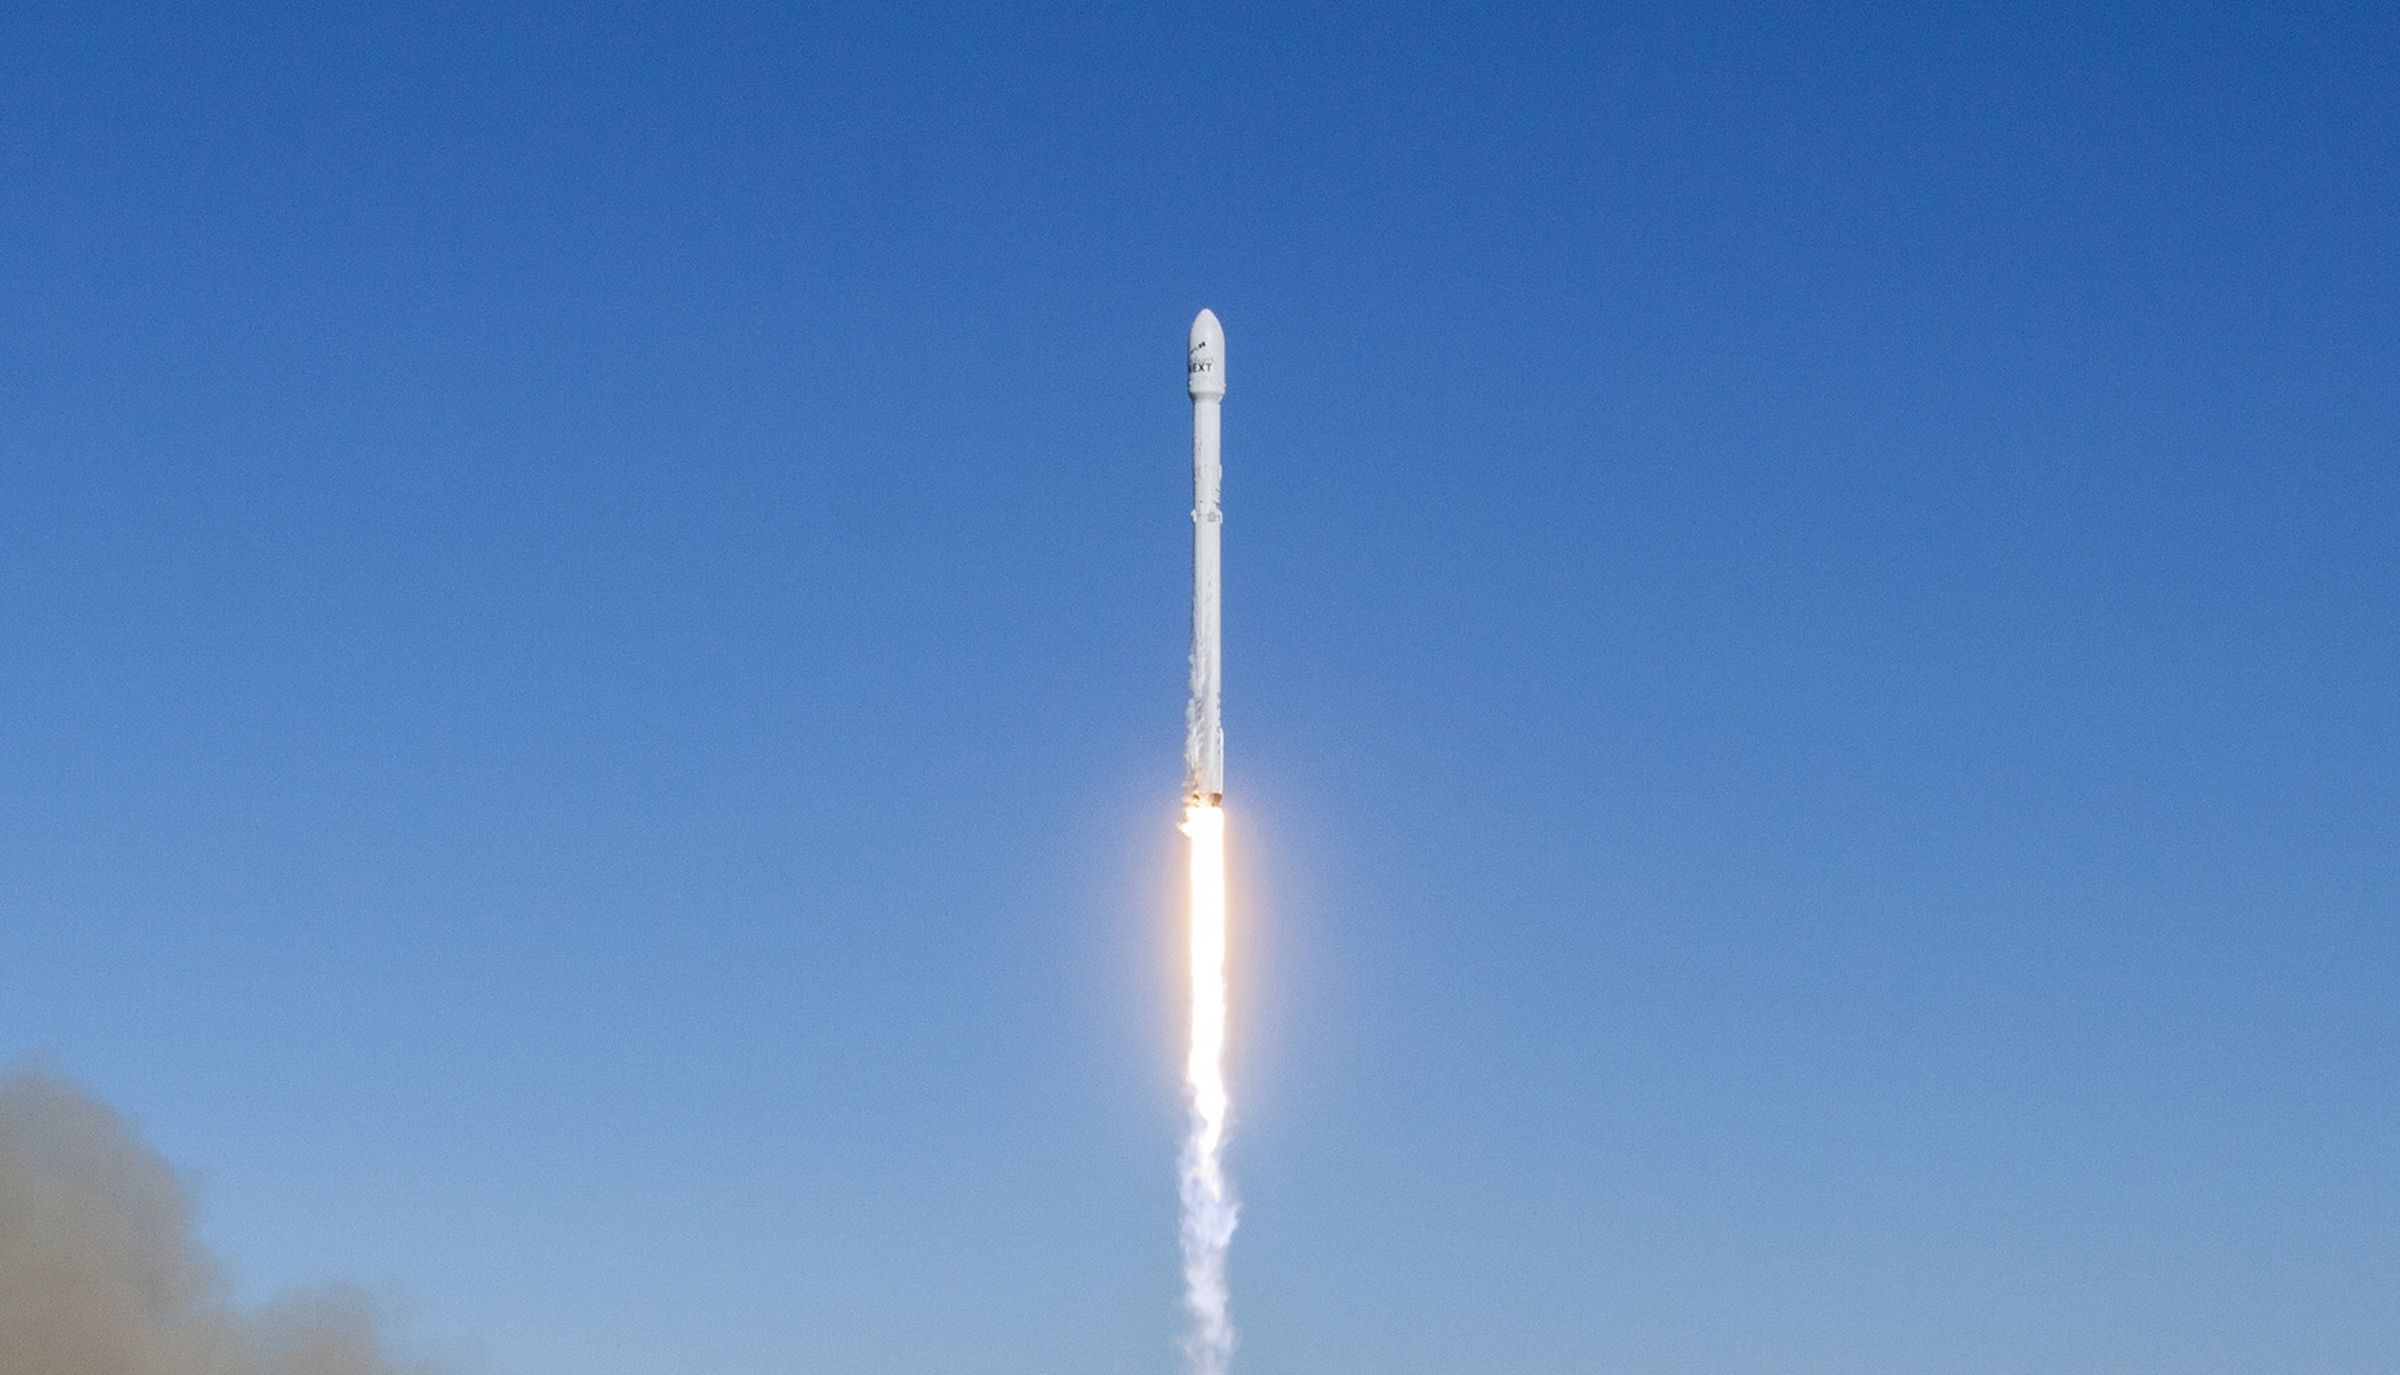 The Falcon 9 rocket that launched the first 10 Iridium NEXT satellites in January.